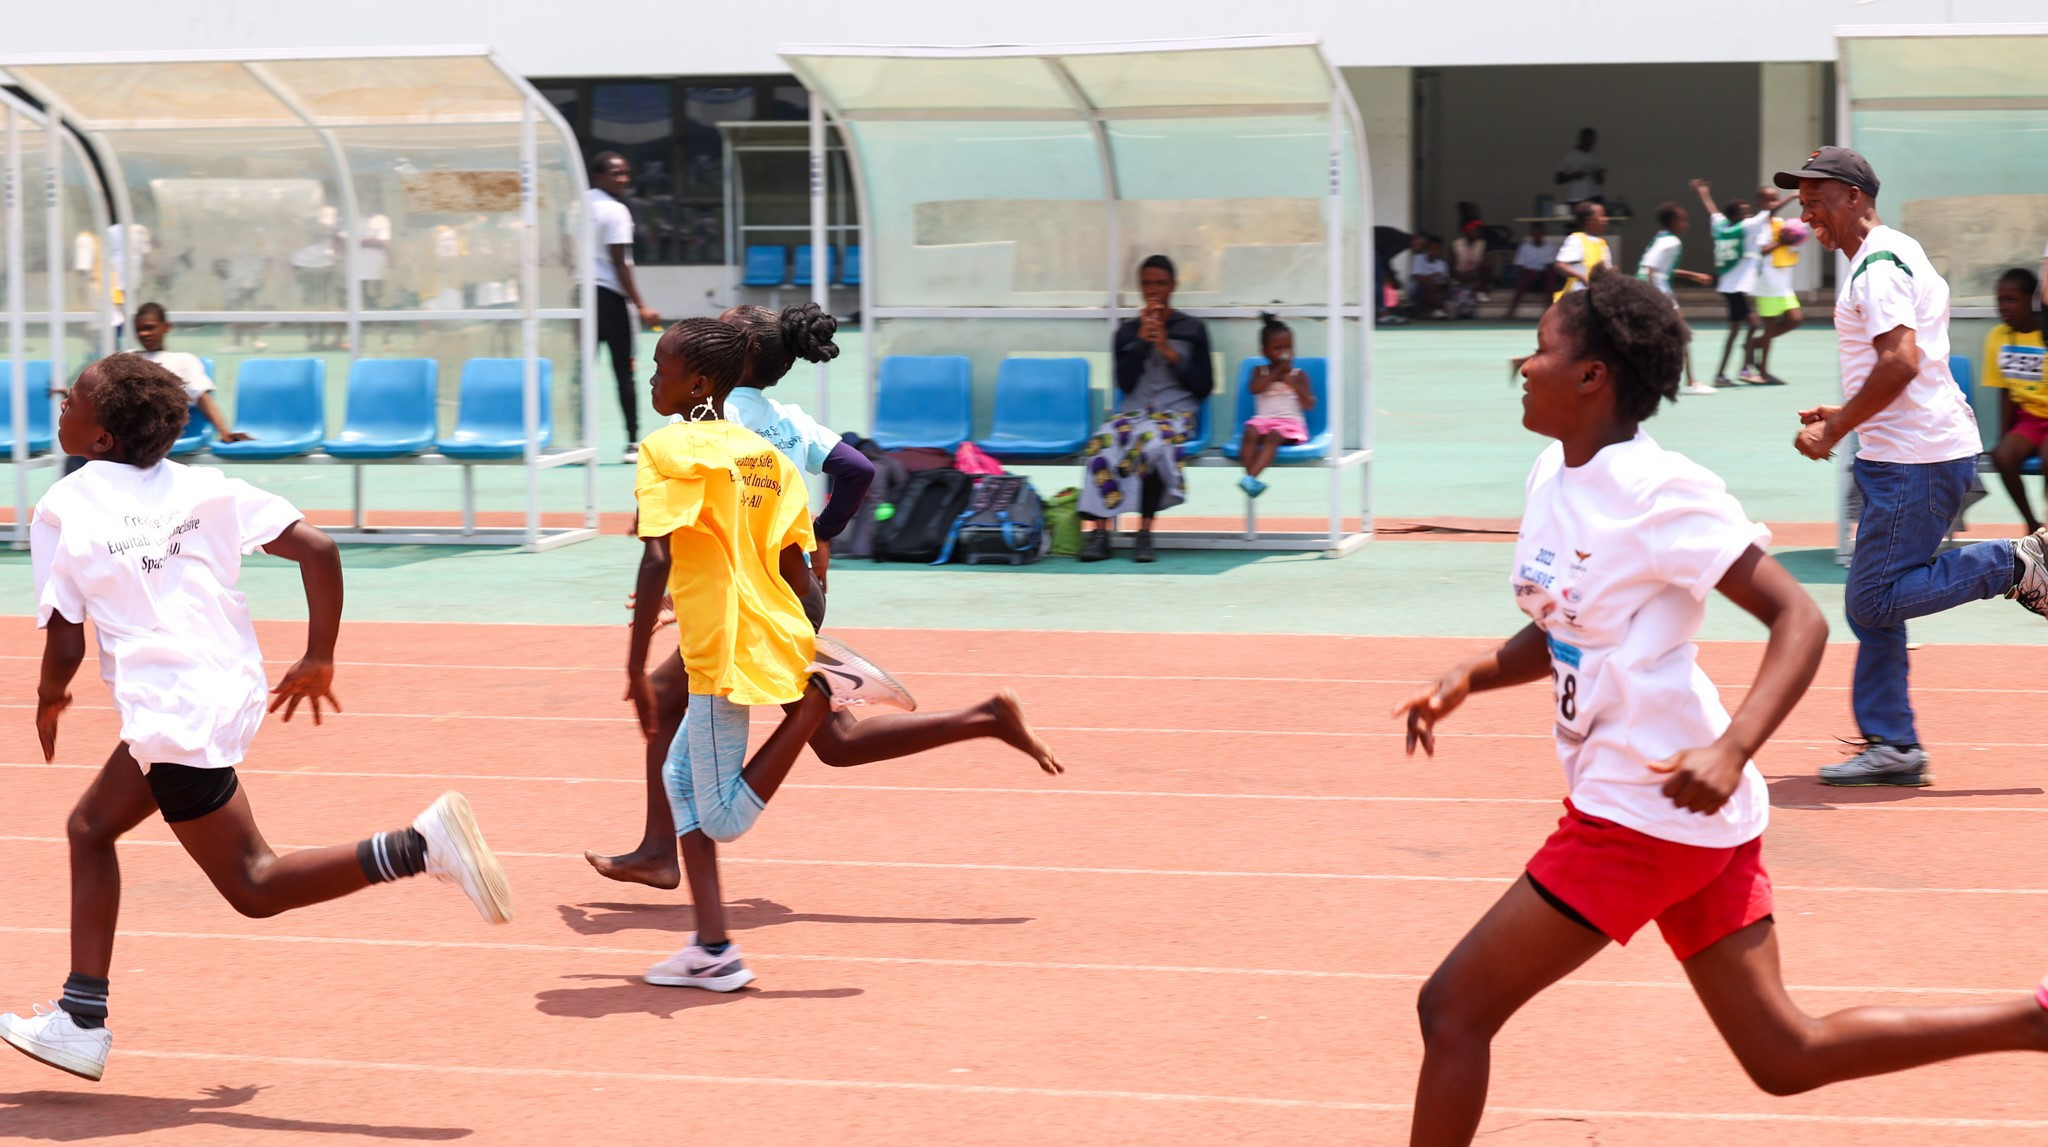 Athletics was among the sports that featured at the Inclusive Sports Festival ©NOCZ